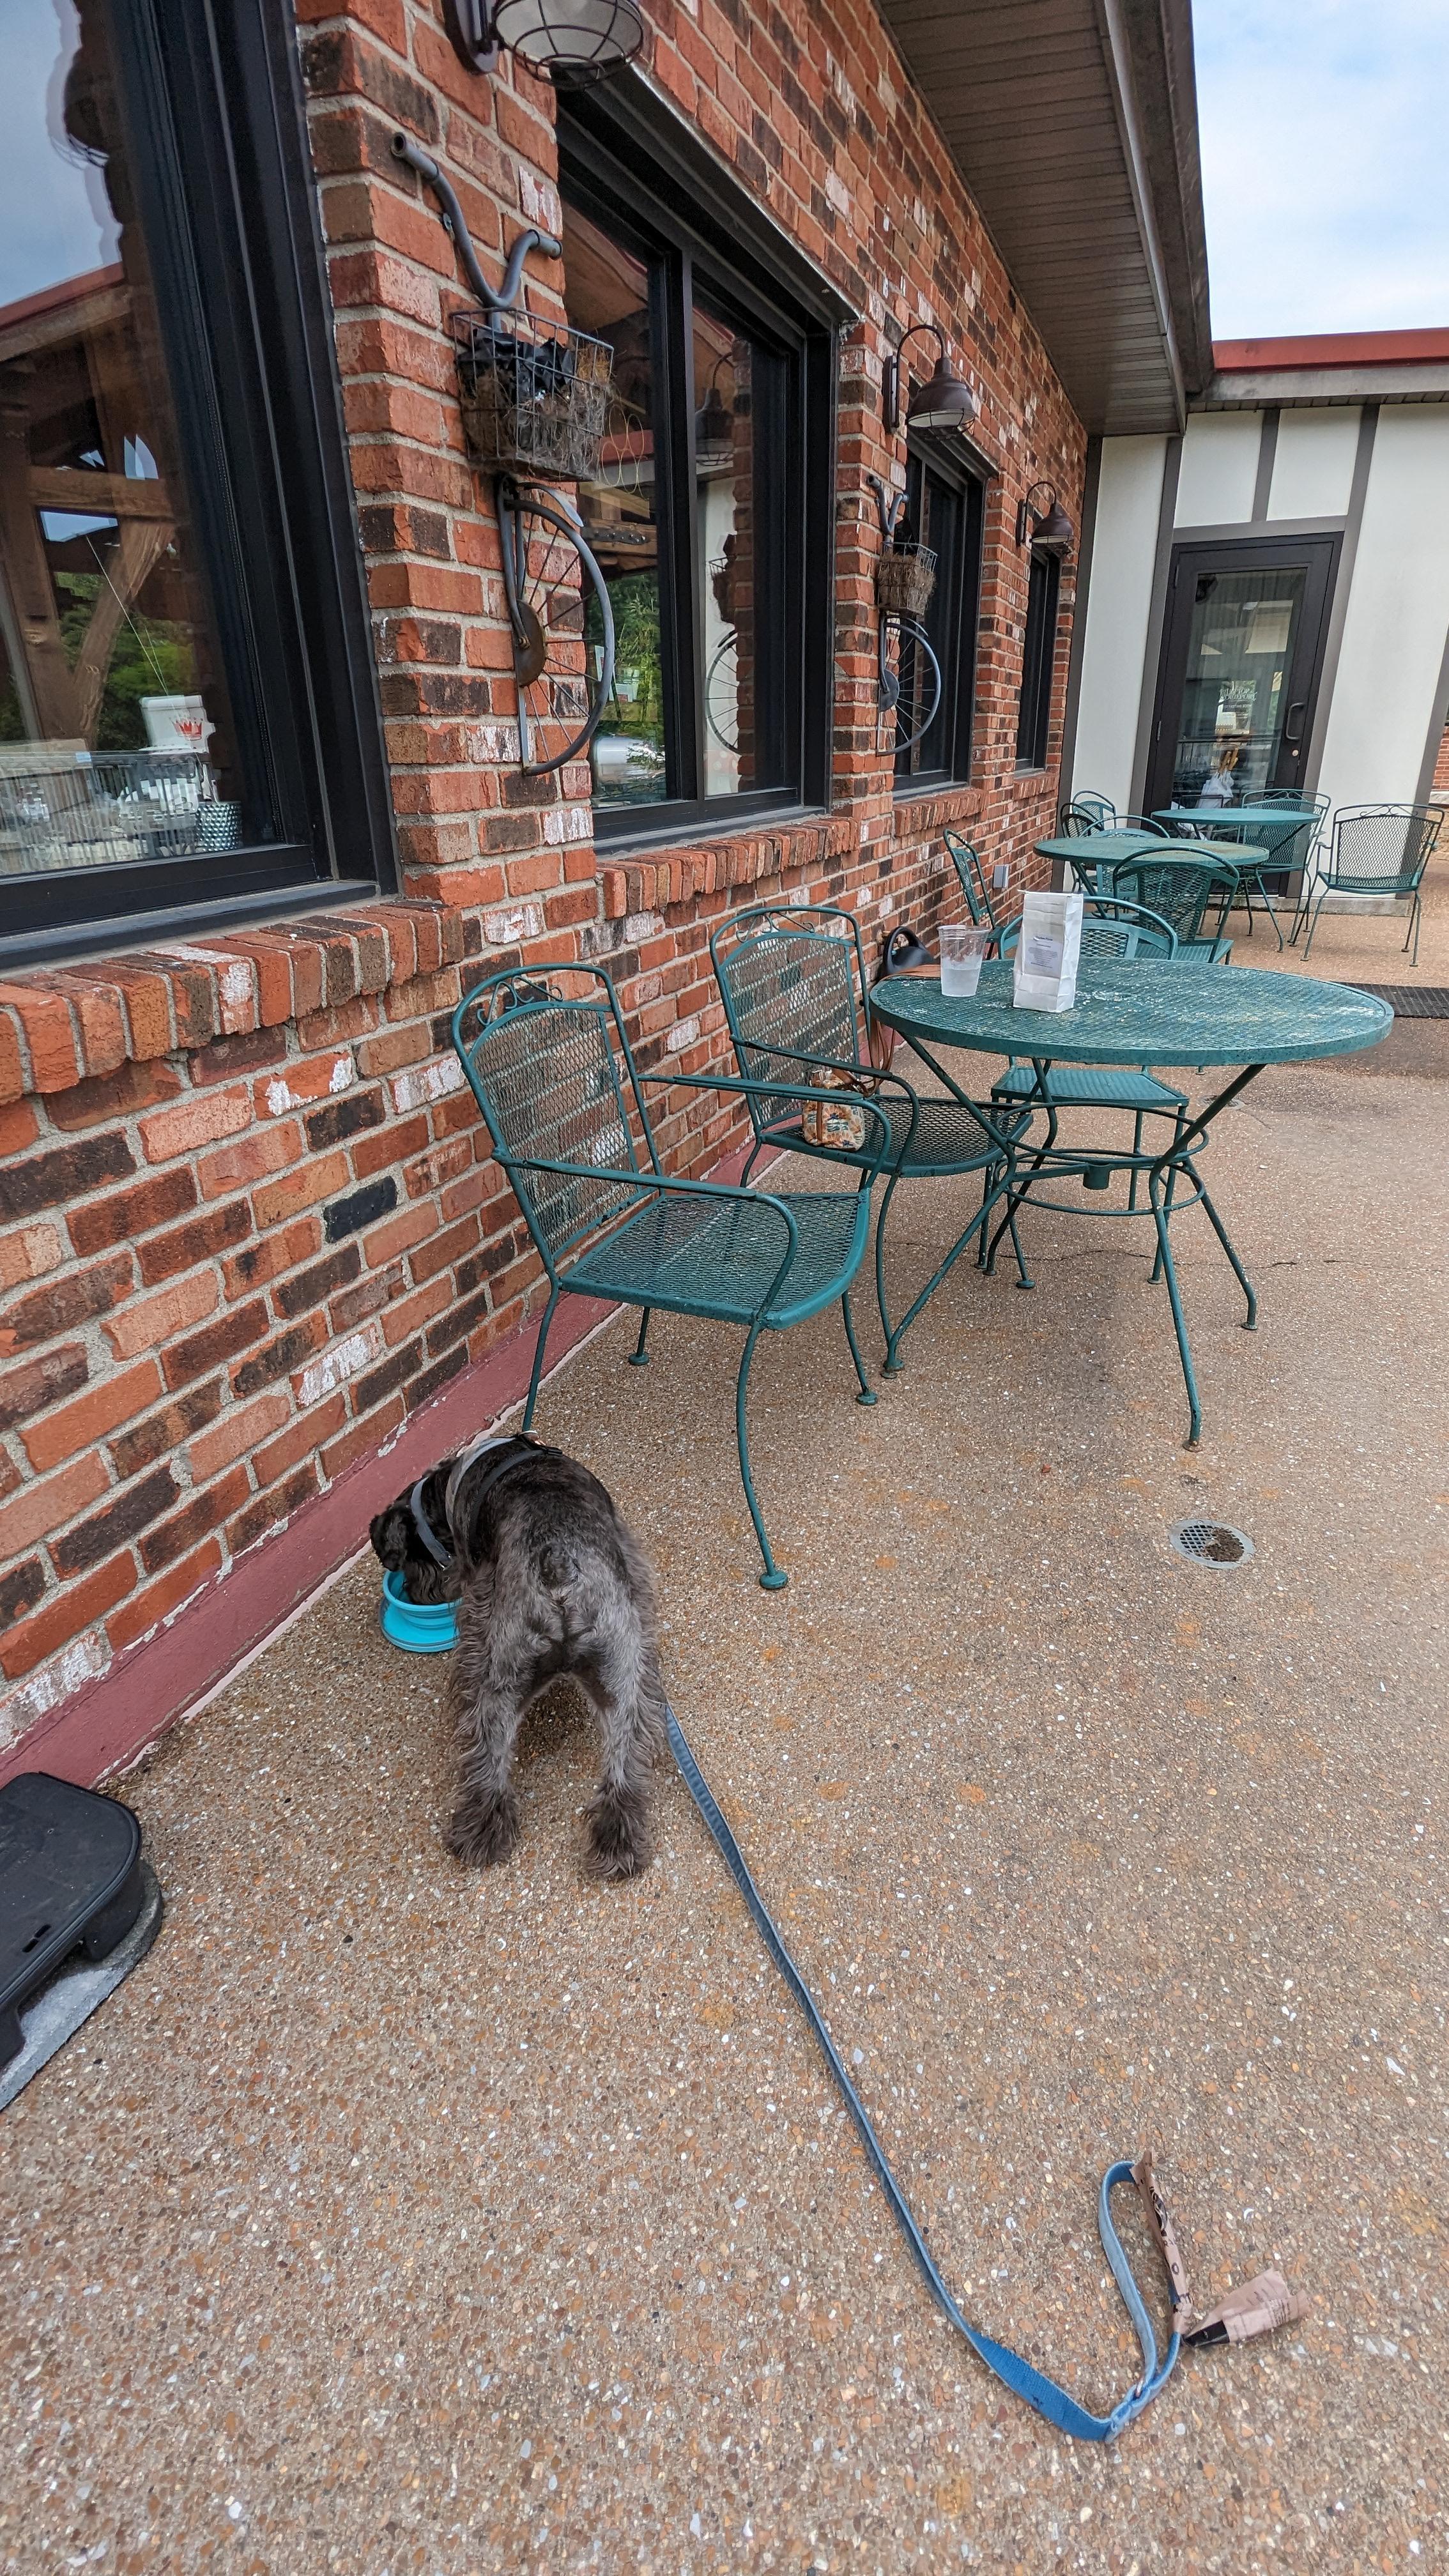 Pet Friendly The Tasting Room on the Blufftop at Rocheport